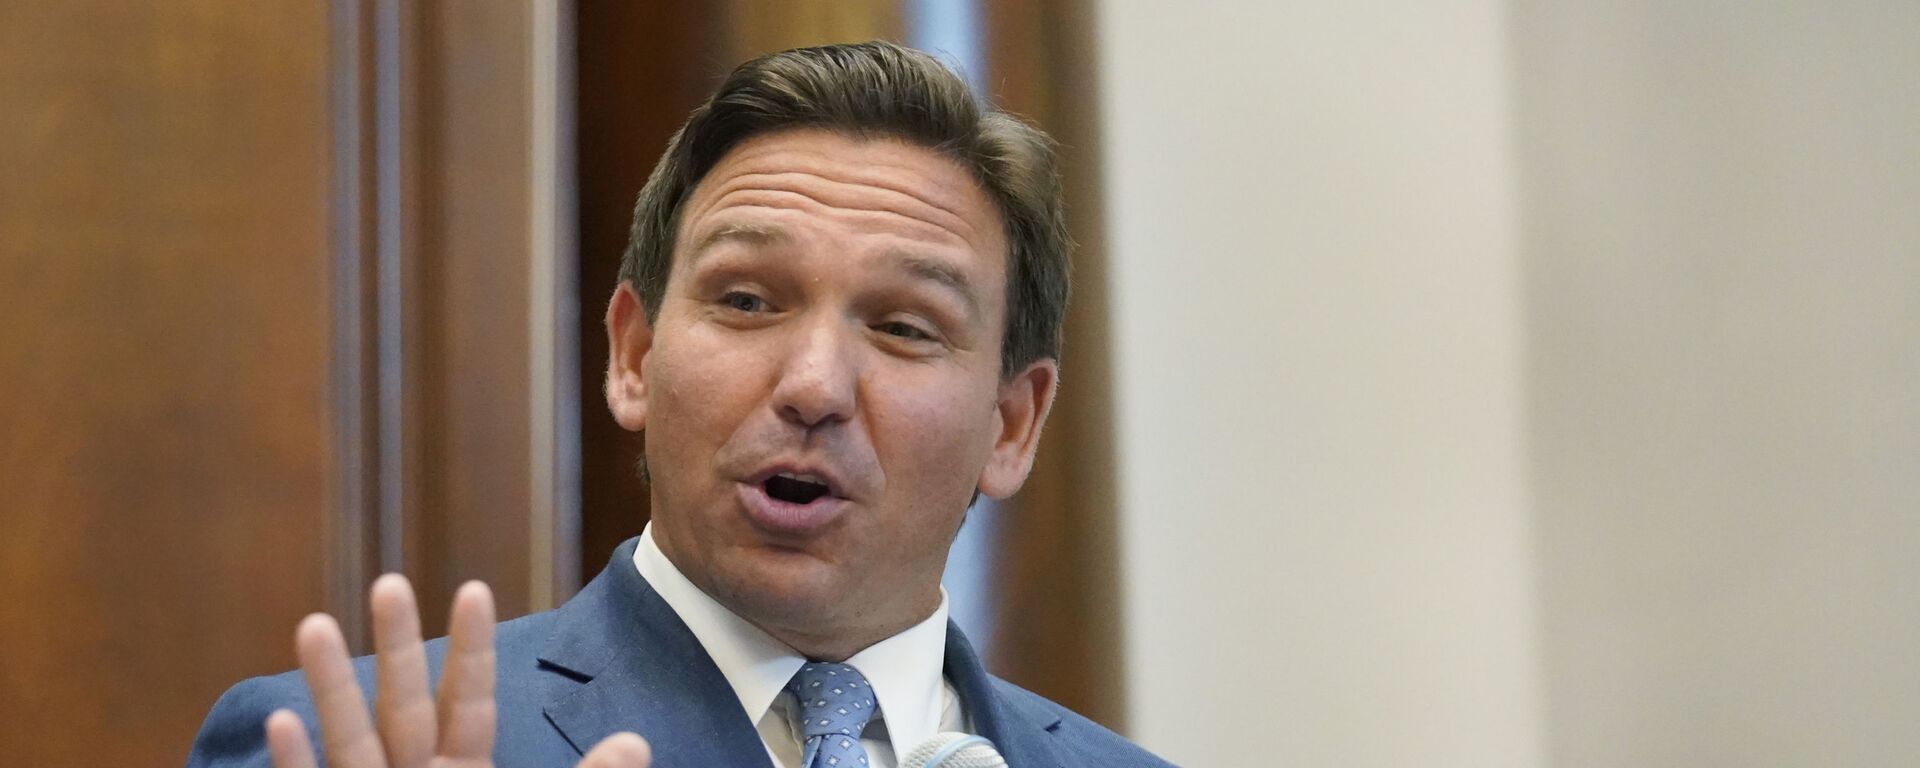 Florida Gov. Ron DeSantis gestures as he speaks, Monday, June 14, 2021, at the Shul of Bal Harbour, a Jewish community center in Surfside, Fla. DeSantis visited the South Florida temple to denounce anti-Semitism and stand with Israel, while signing a bill into law that would require public schools in his state to set aside moments of silence for children to meditate or pray - Sputnik International, 1920, 23.01.2024